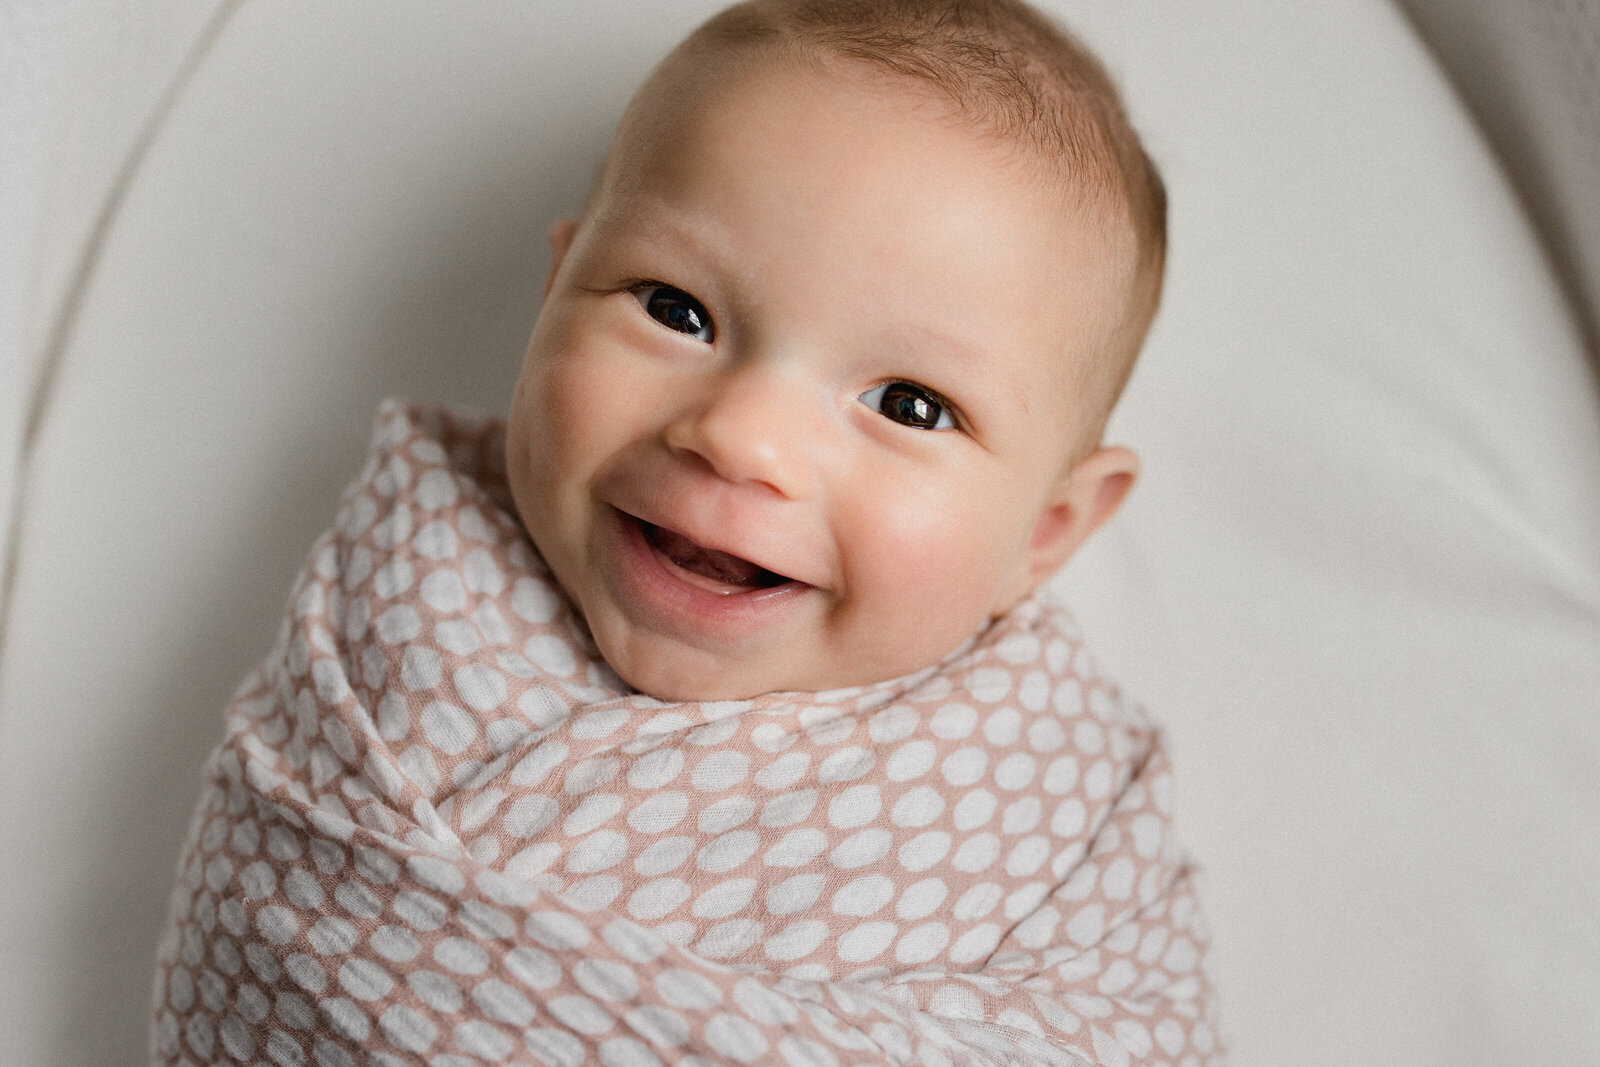 Six month photos of a smiley new baby looking at the camera